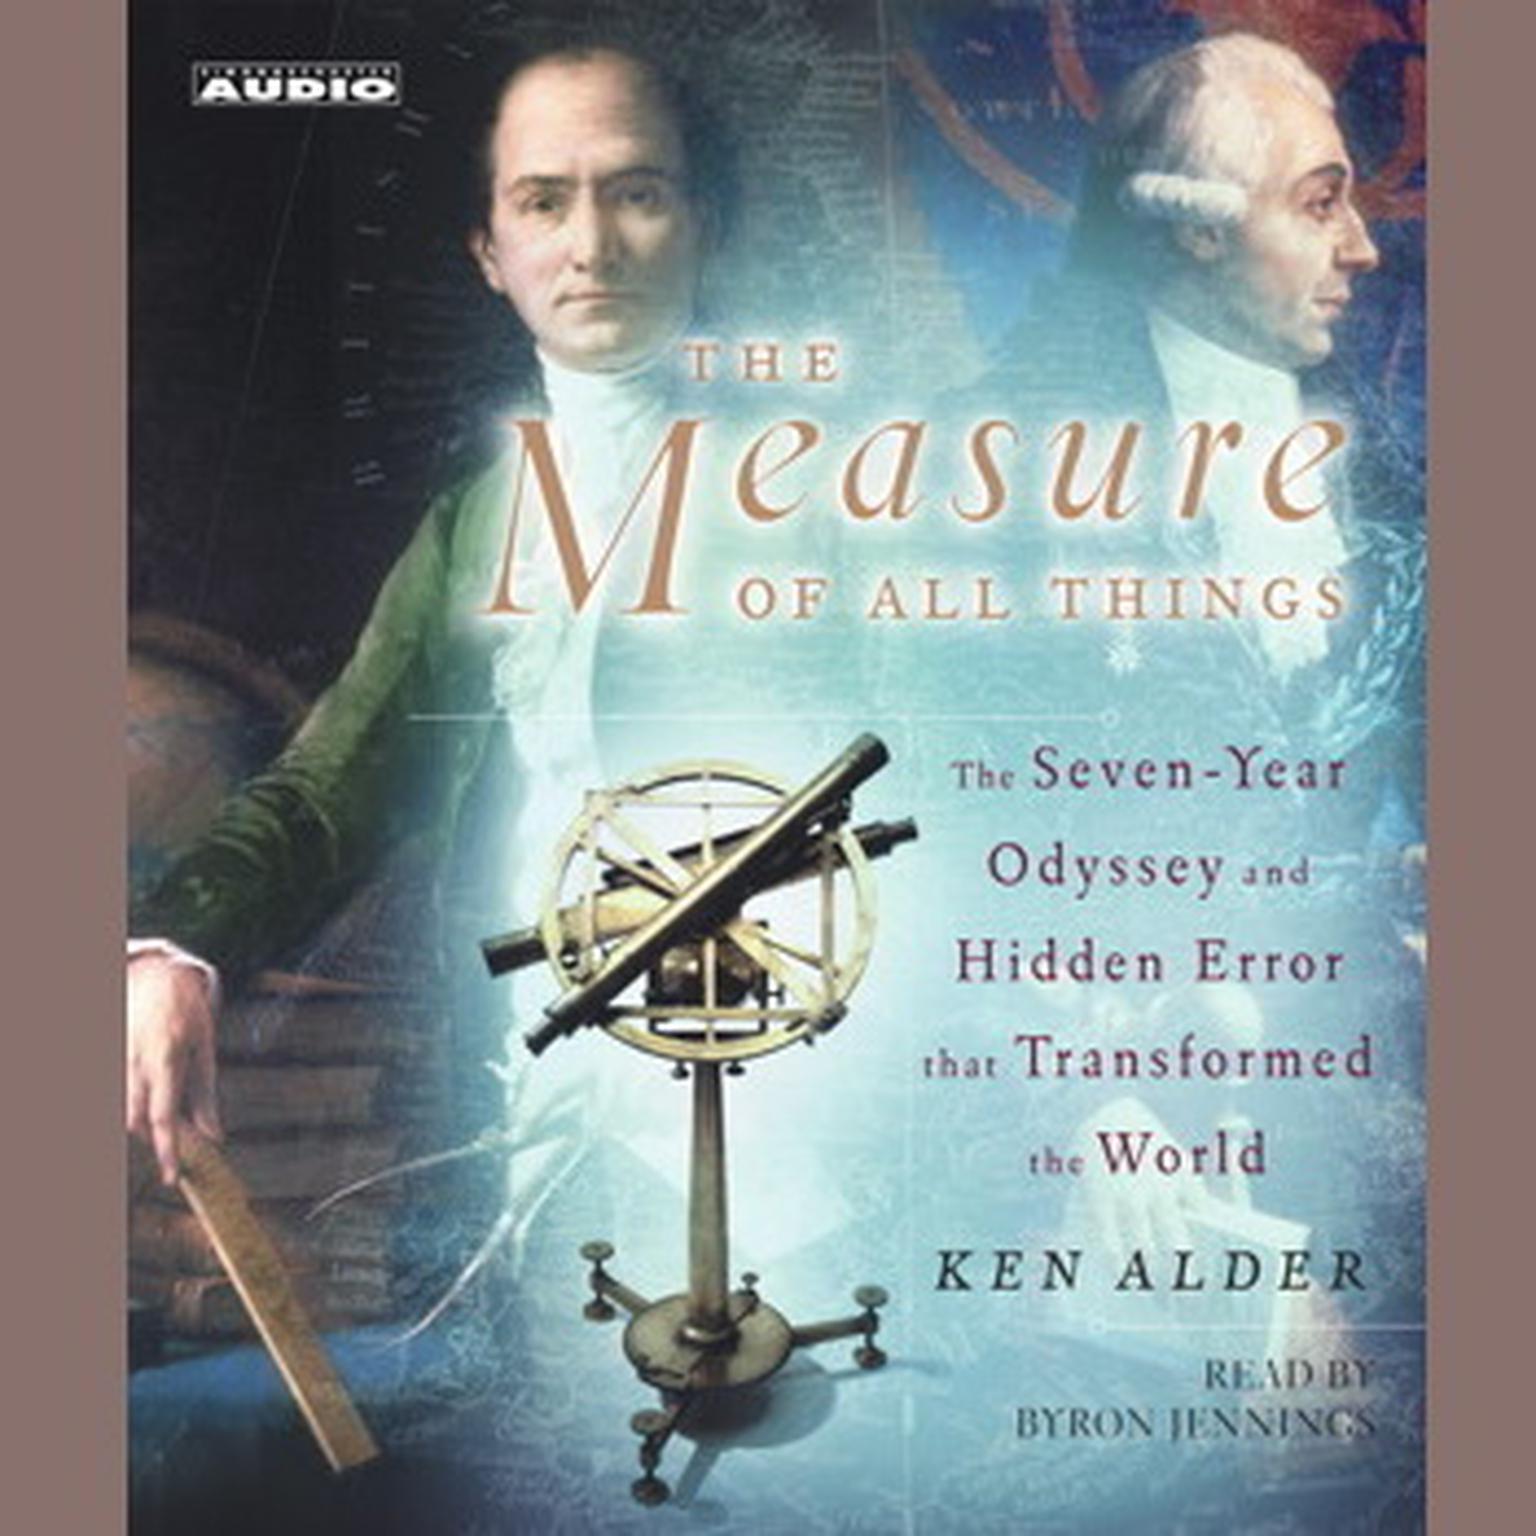 The Measure of All Things (Abridged): The Seven-Year Odyssey and Hidden Error That Transformed the World Audiobook, by Ken Alder